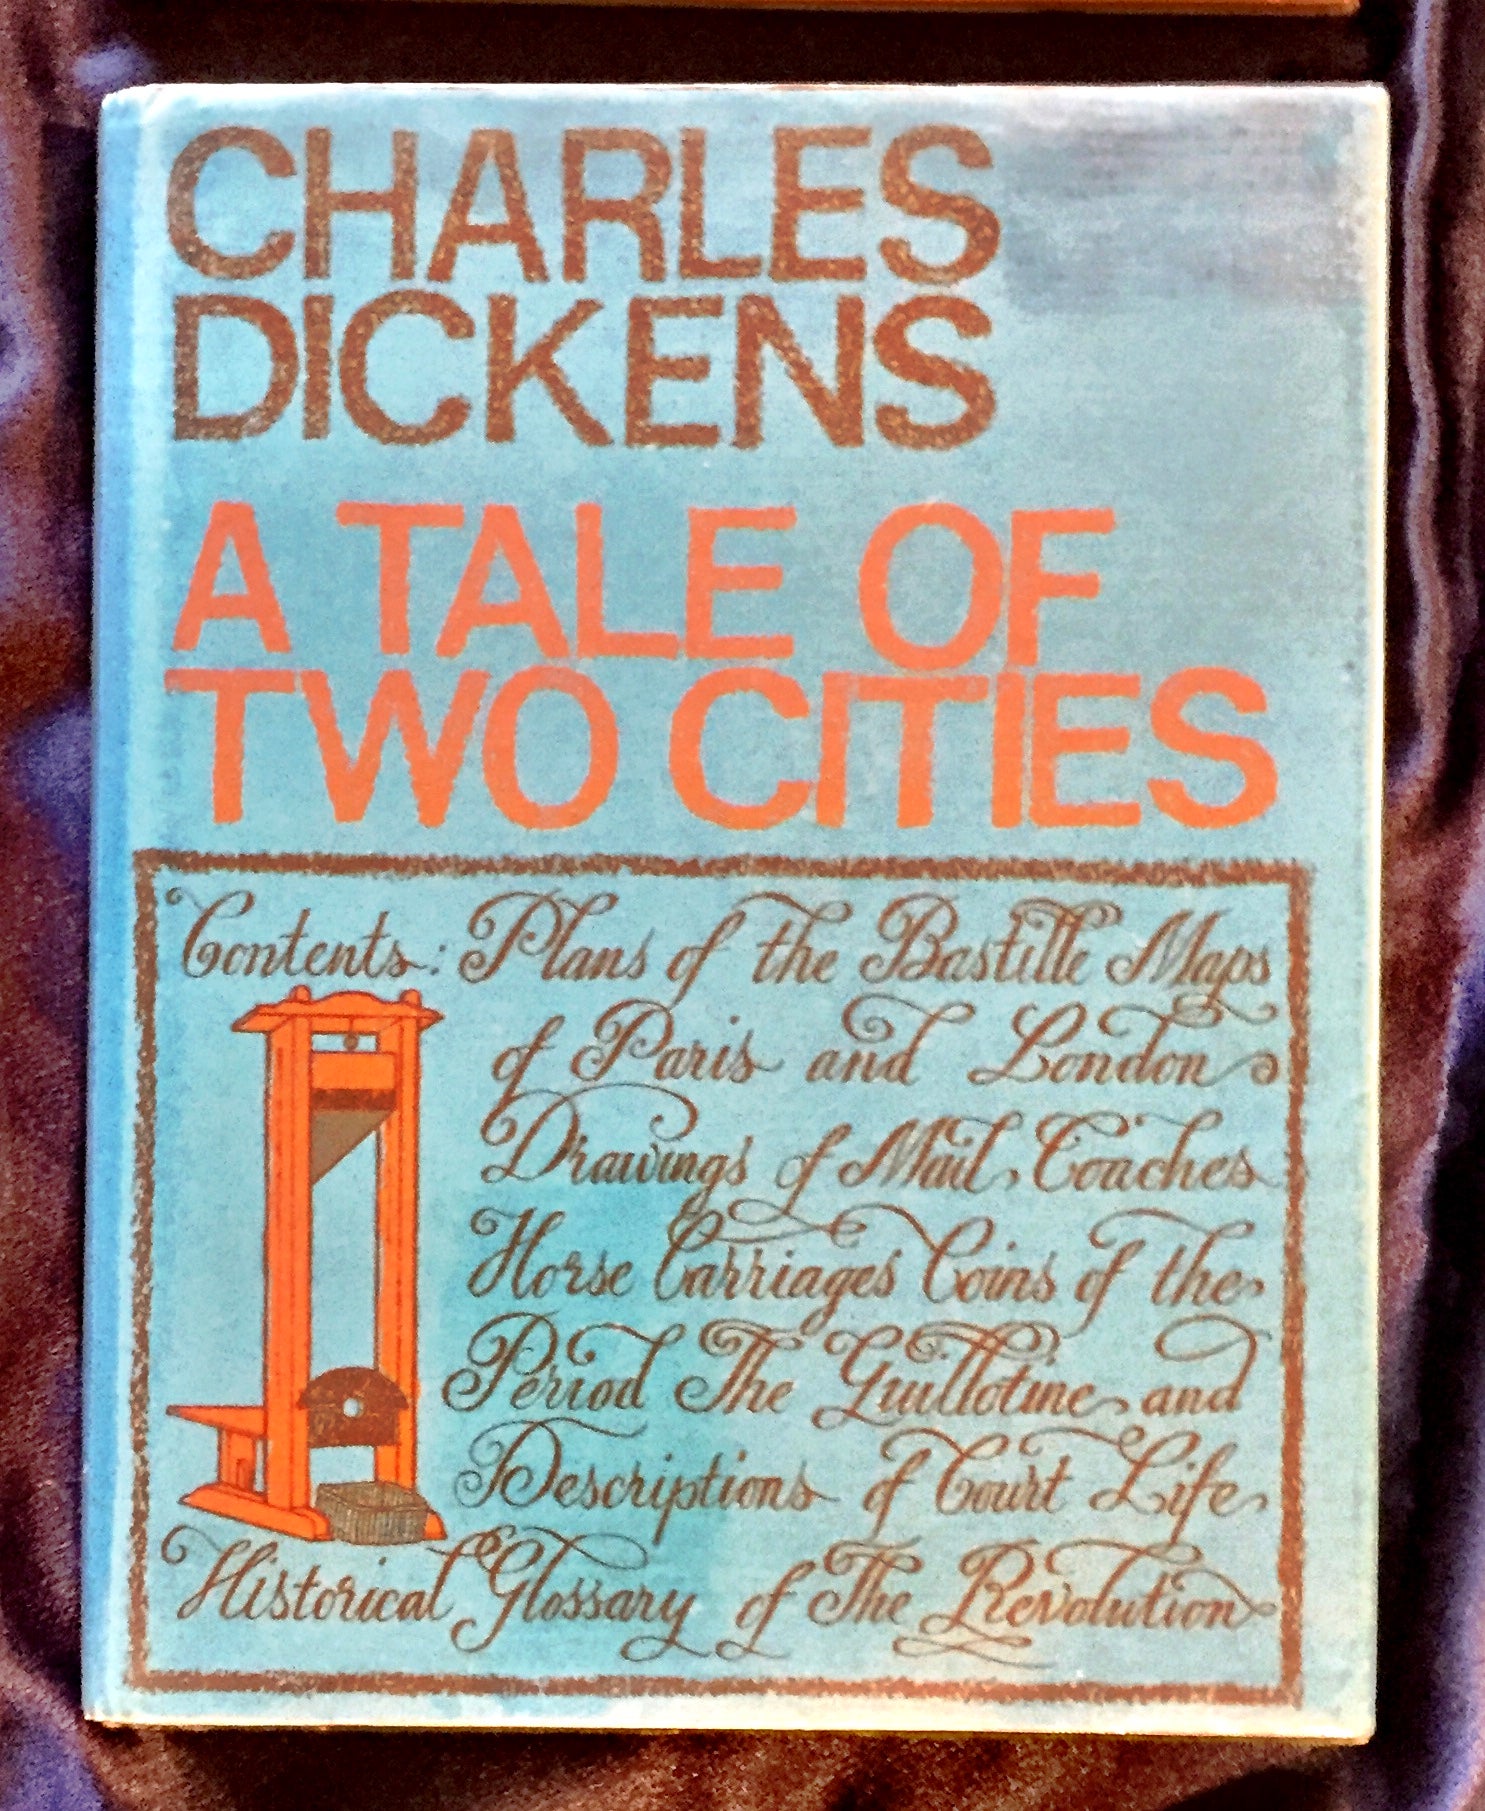 a tale of two cities book cover